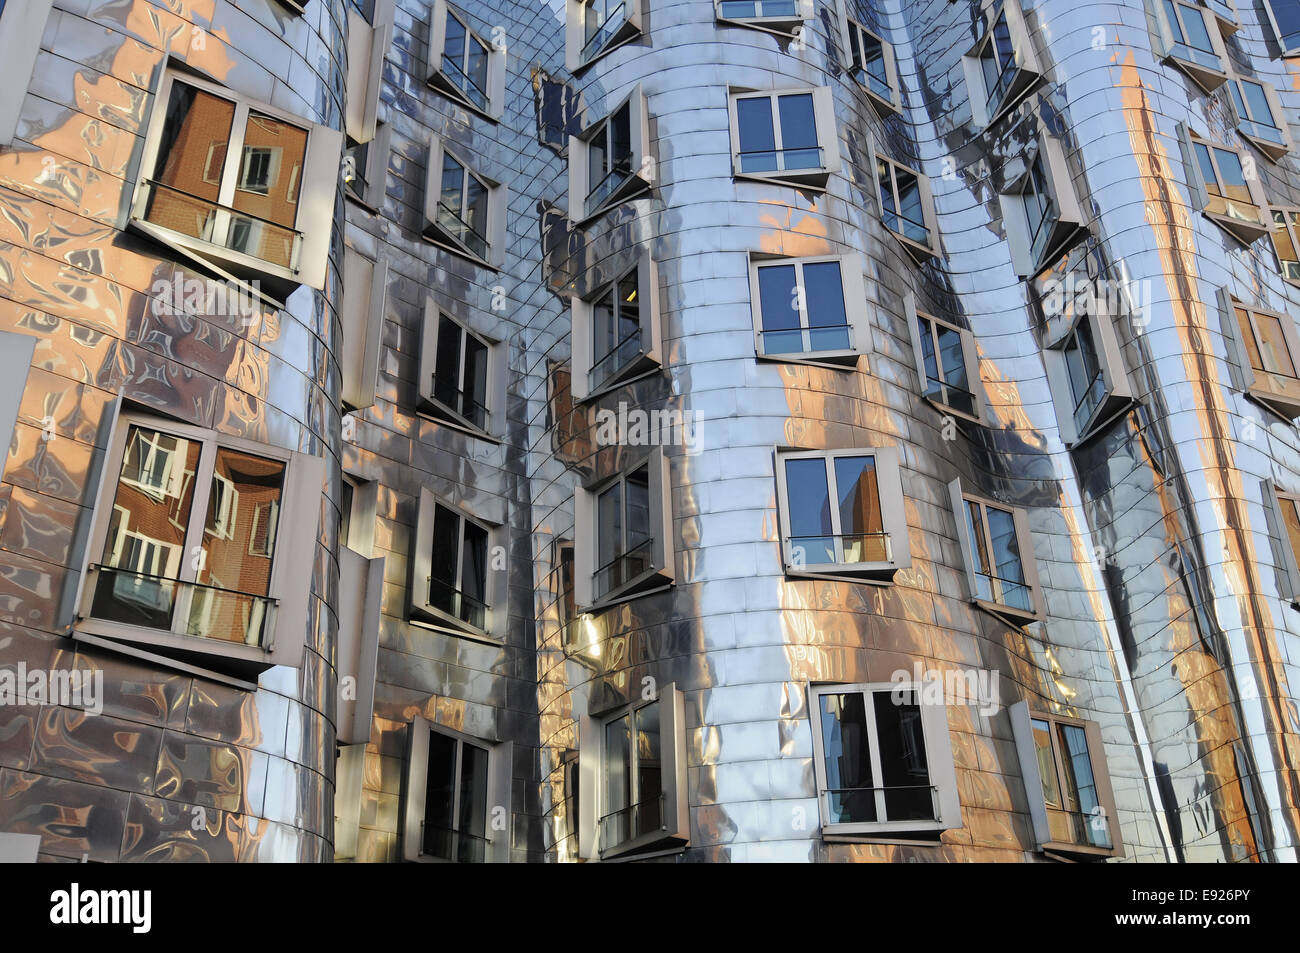 Neuer Zollhof building by architect Frank O. Gehry Stock Photo